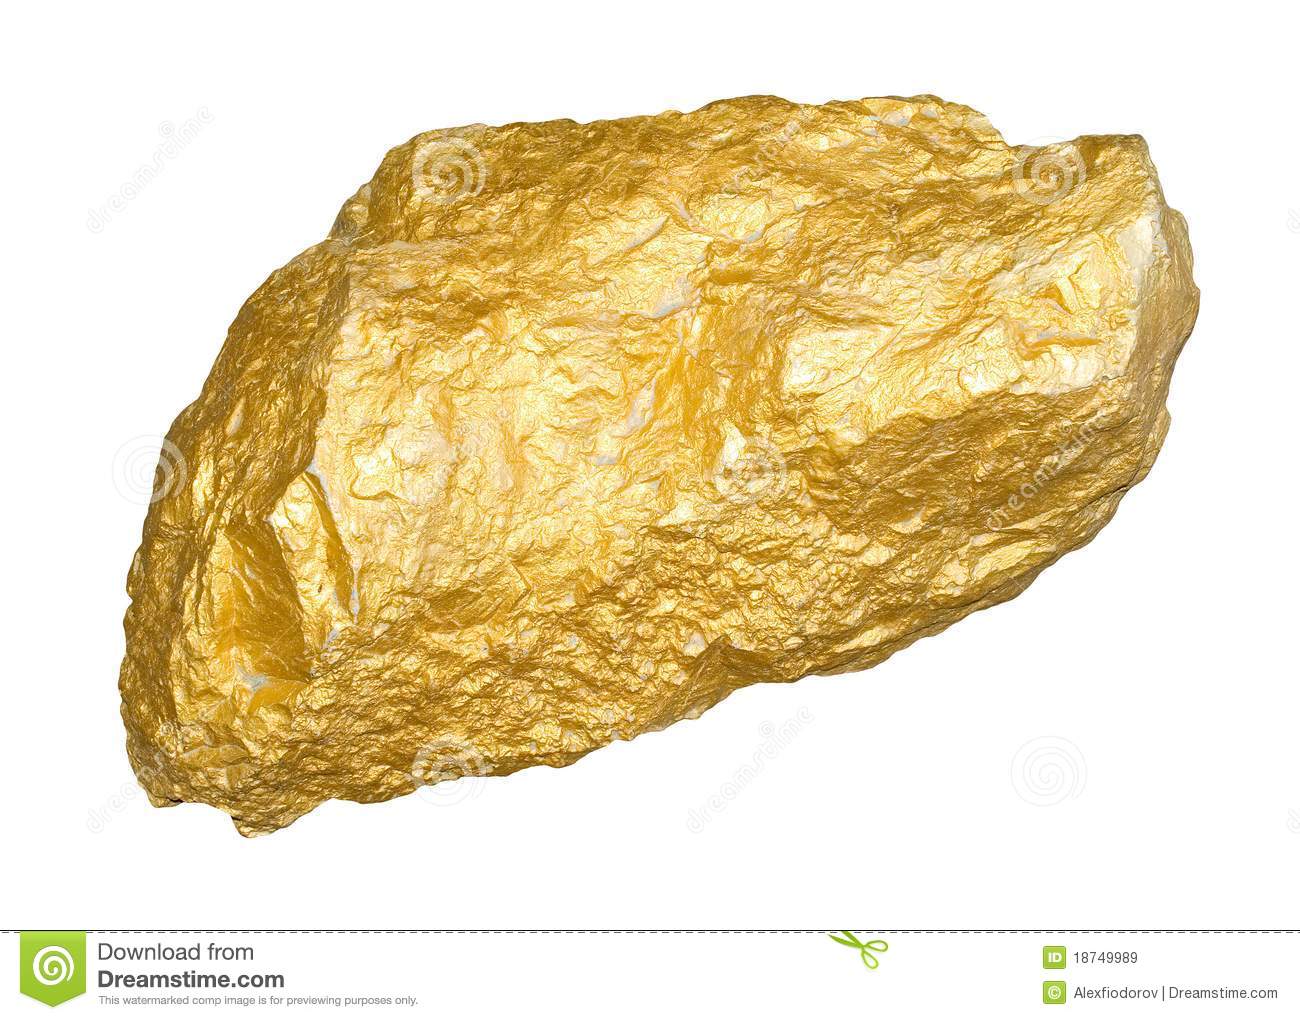 Gold Nugget Clipart Gold Nugget Royalty Free Stock